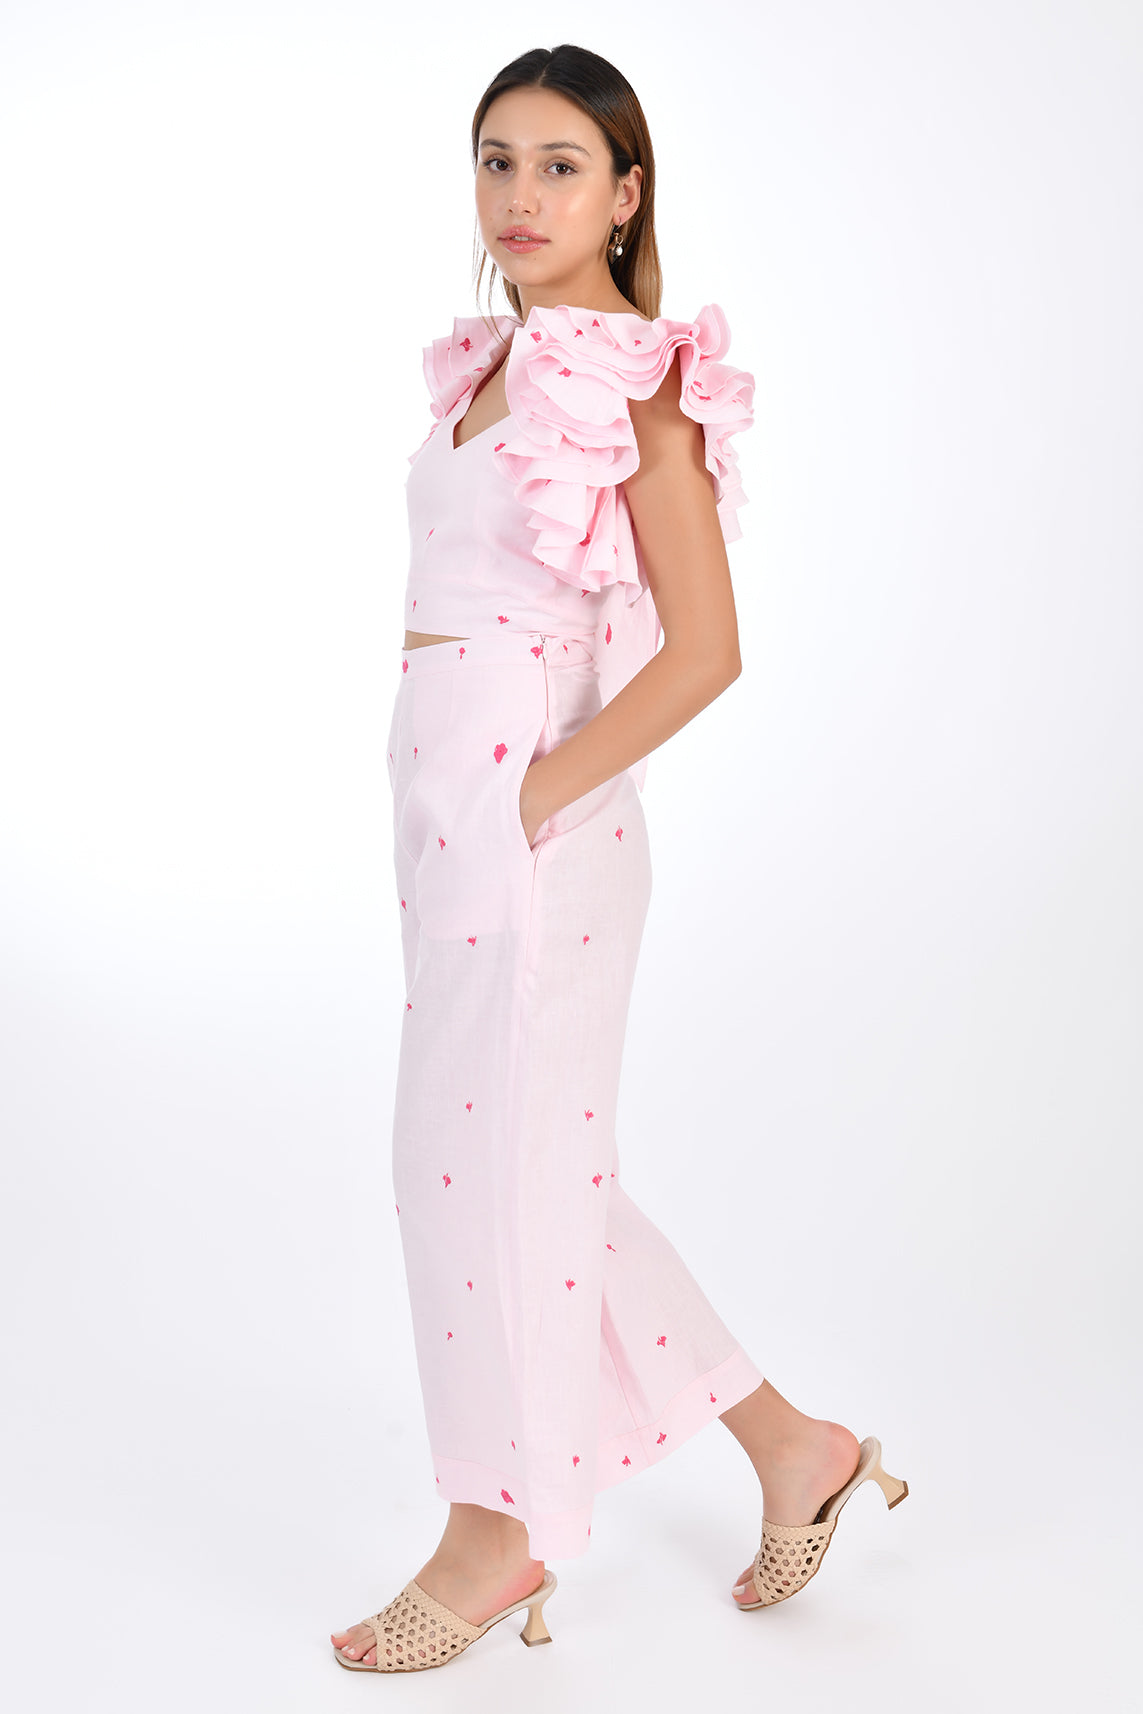 FANM MON ANAIS 2 Piece Linen Top and Pants Set. Side View, showcasing sleeveless top ruffles with intricate embroidery detail and on-seam pockets featured on wide-leg pants that boast a matching embroidery detail for a cohesive look. 